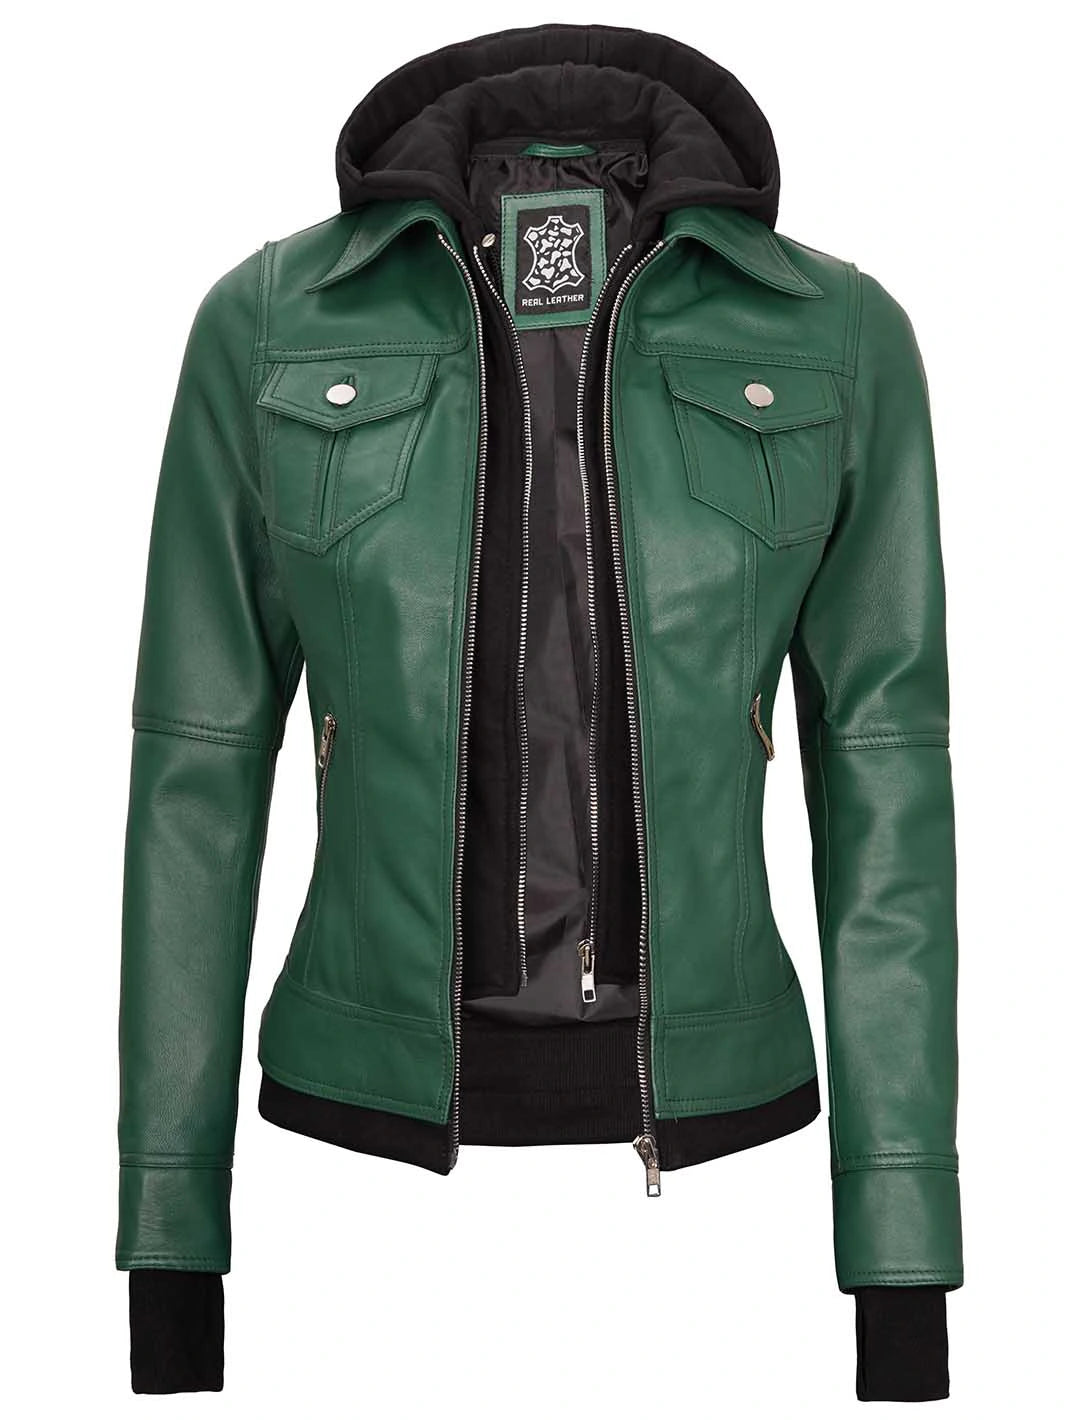 green leather jacket with hooded